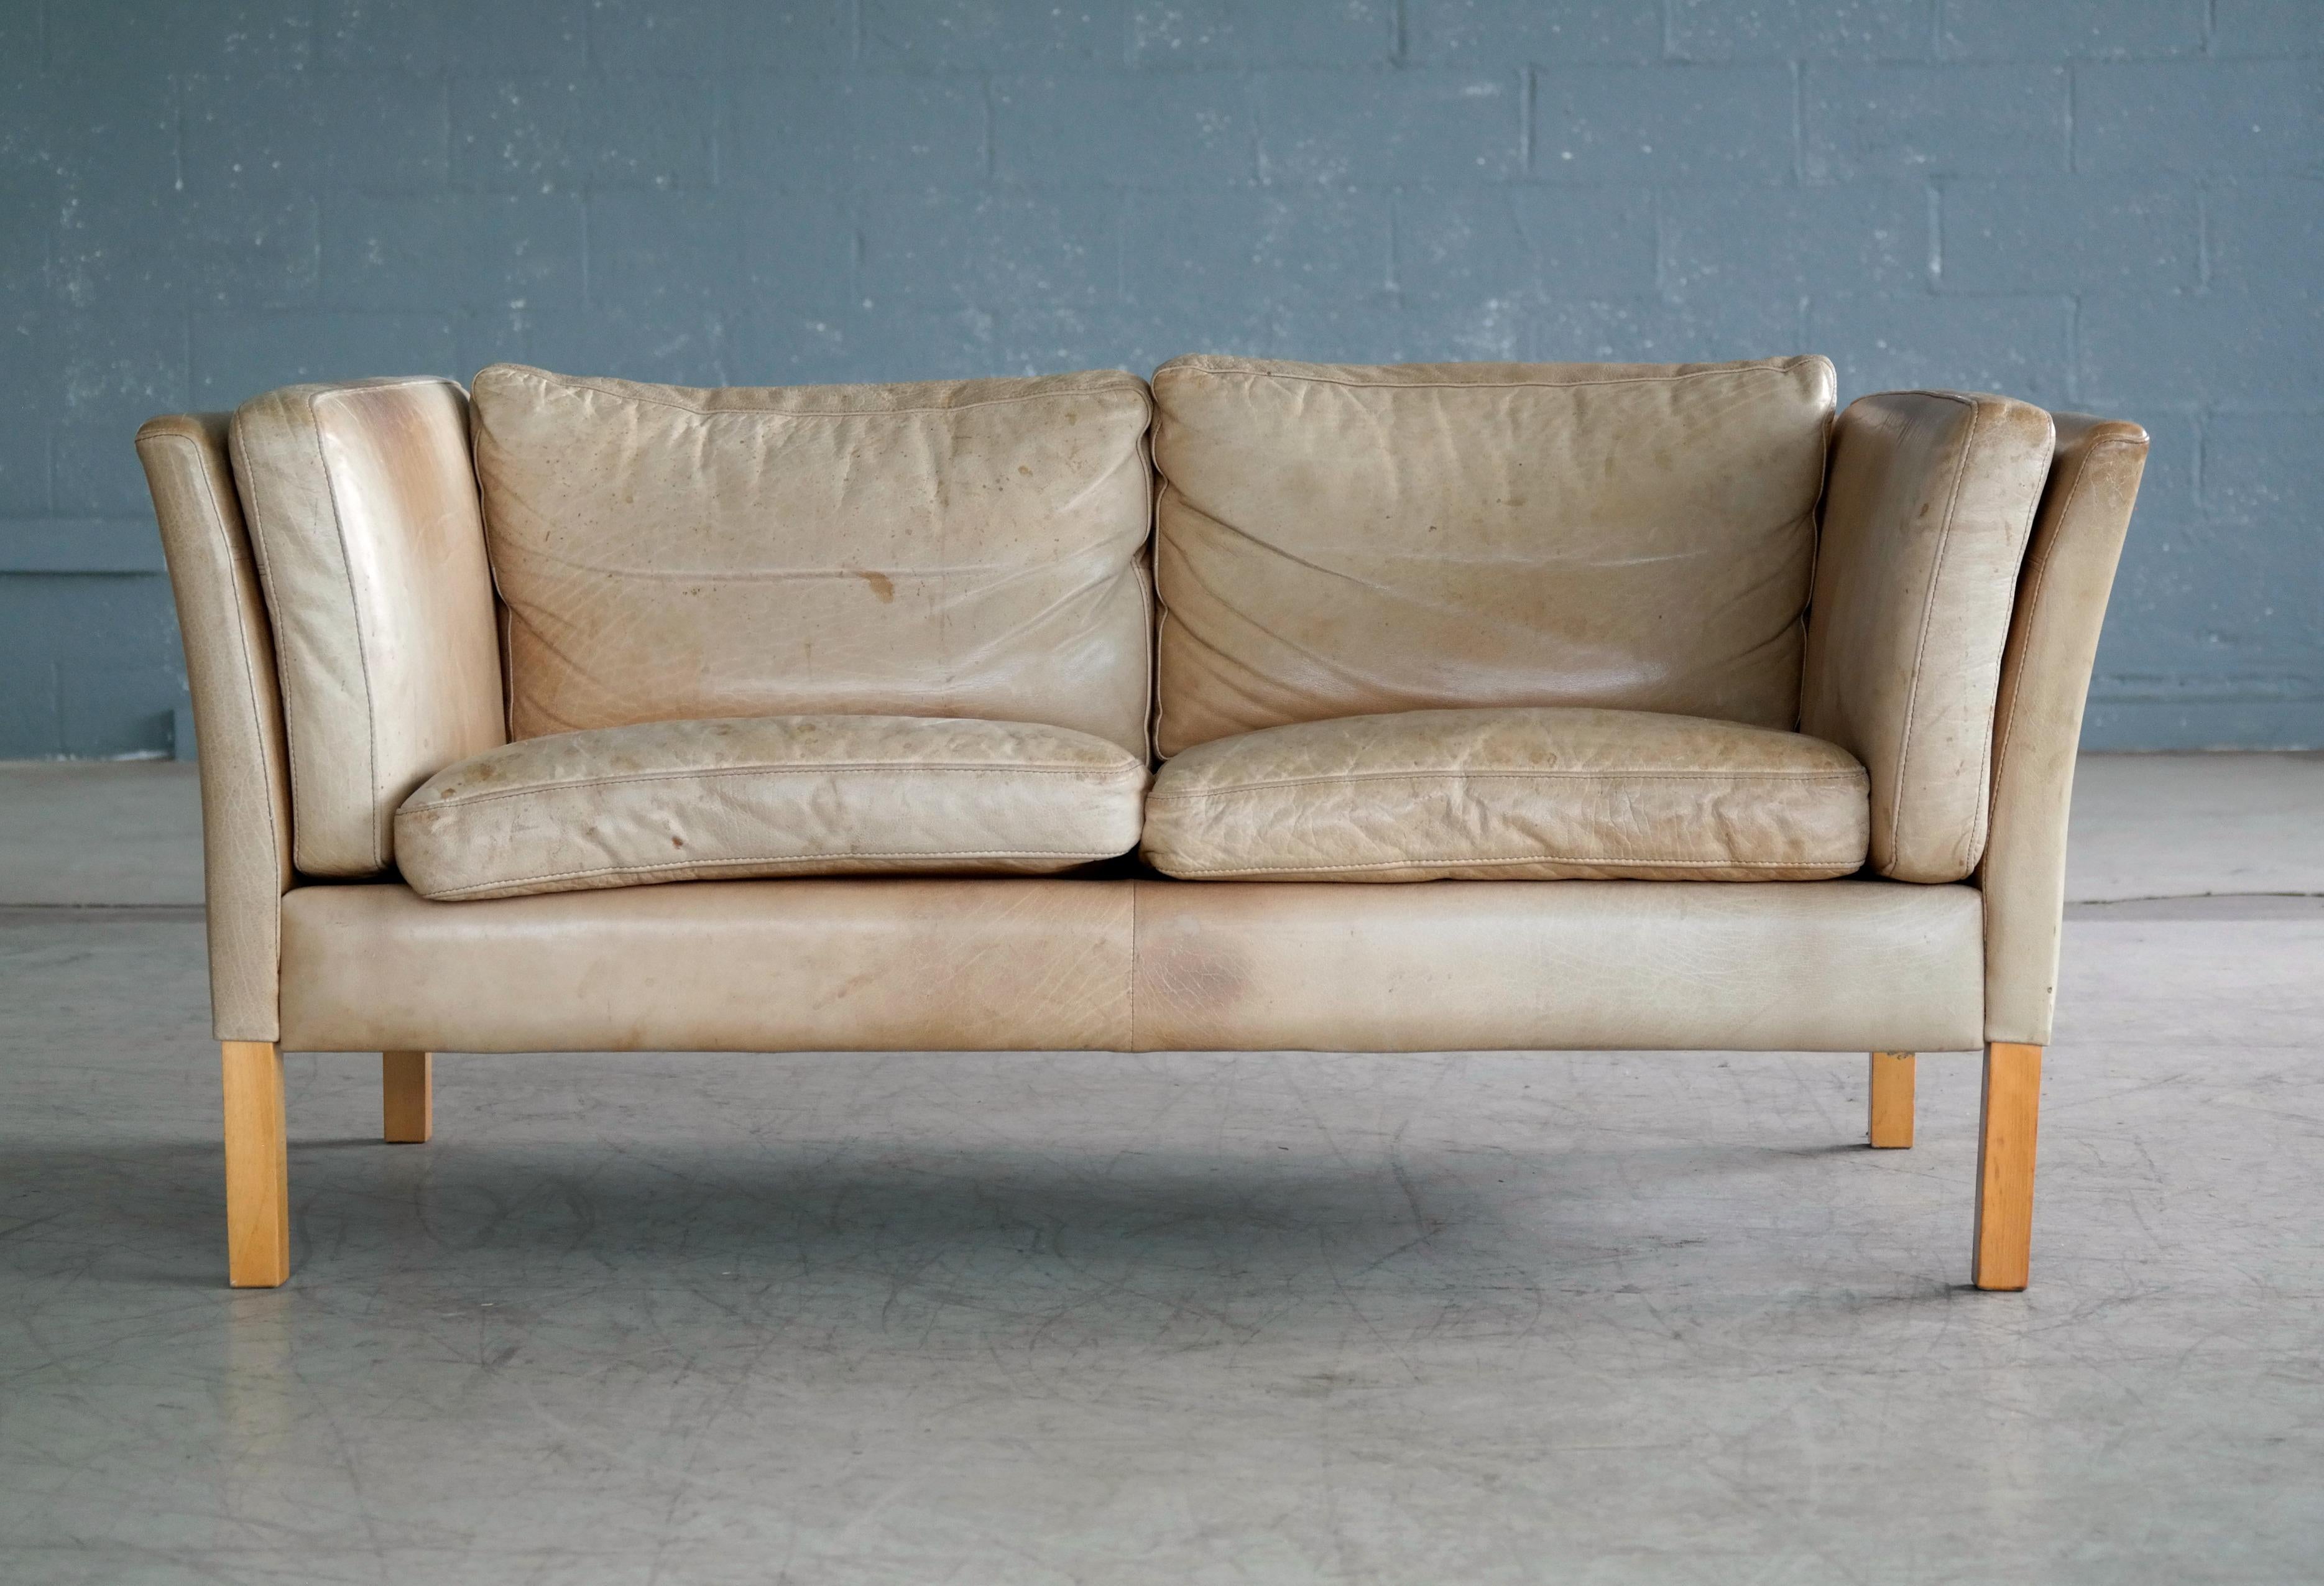 Great loveseat or two-seat sofa made by Stouby, Denmark. High quality construction blond beech wood frame around the armrests covered in a nice tan leather that has faded into an almost creme color over the decades. Significant patina and noble wear